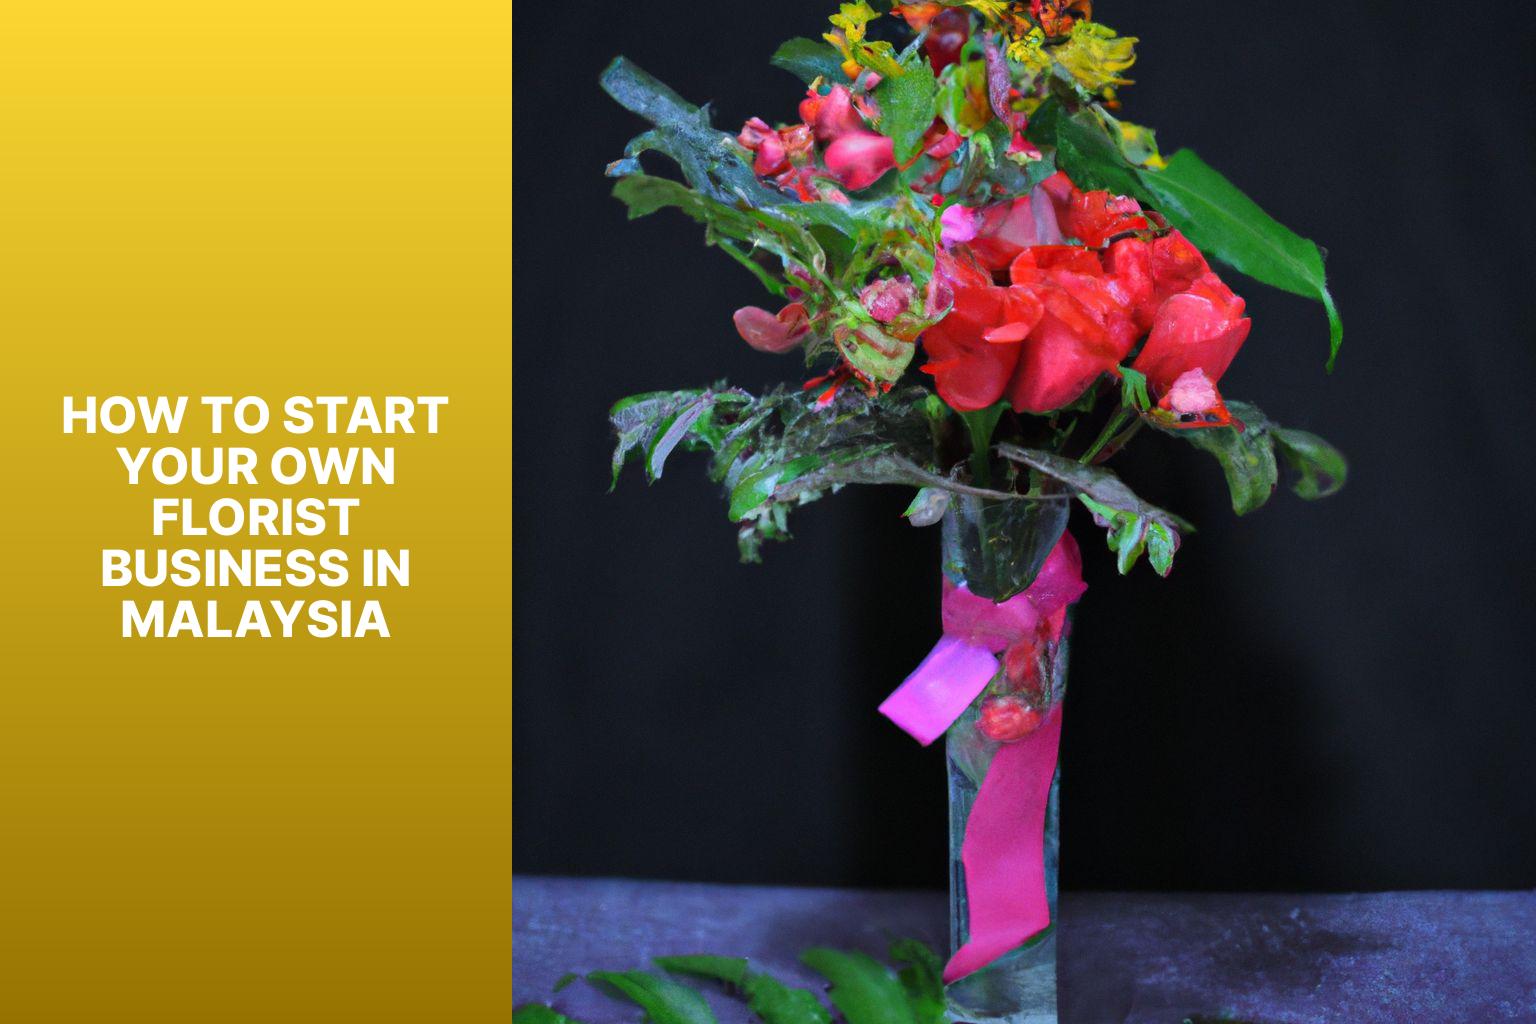 How to Start Your Own Florist Business in Malaysia